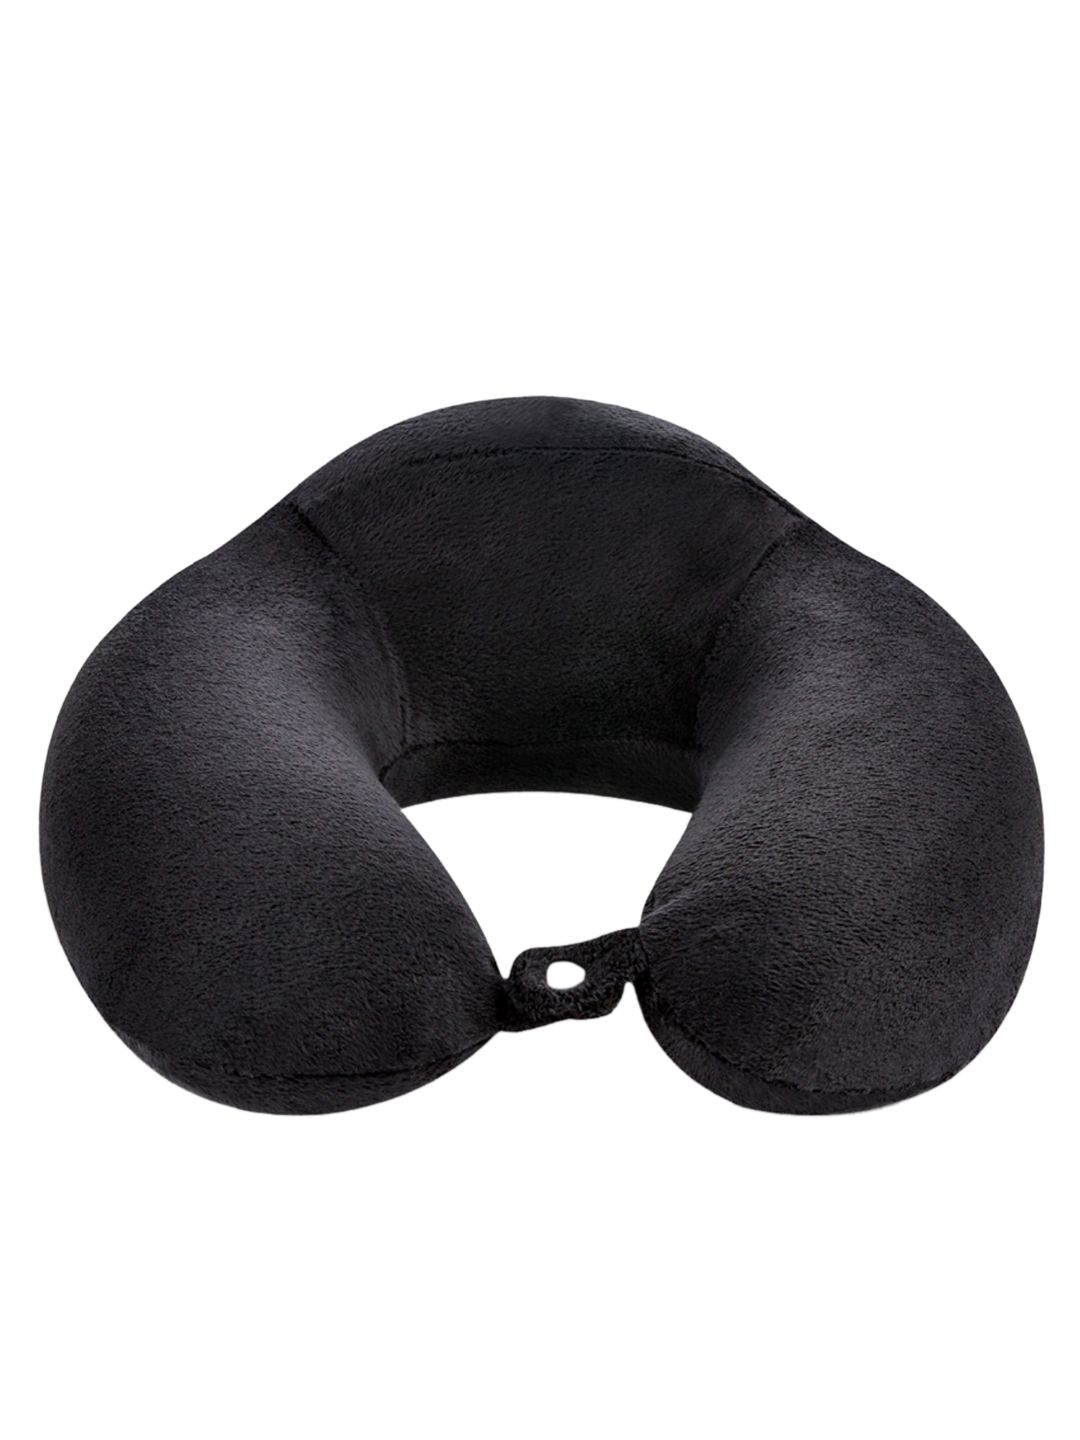 The White Willow Black Memory Foam Travel Neck Pillow Price in India